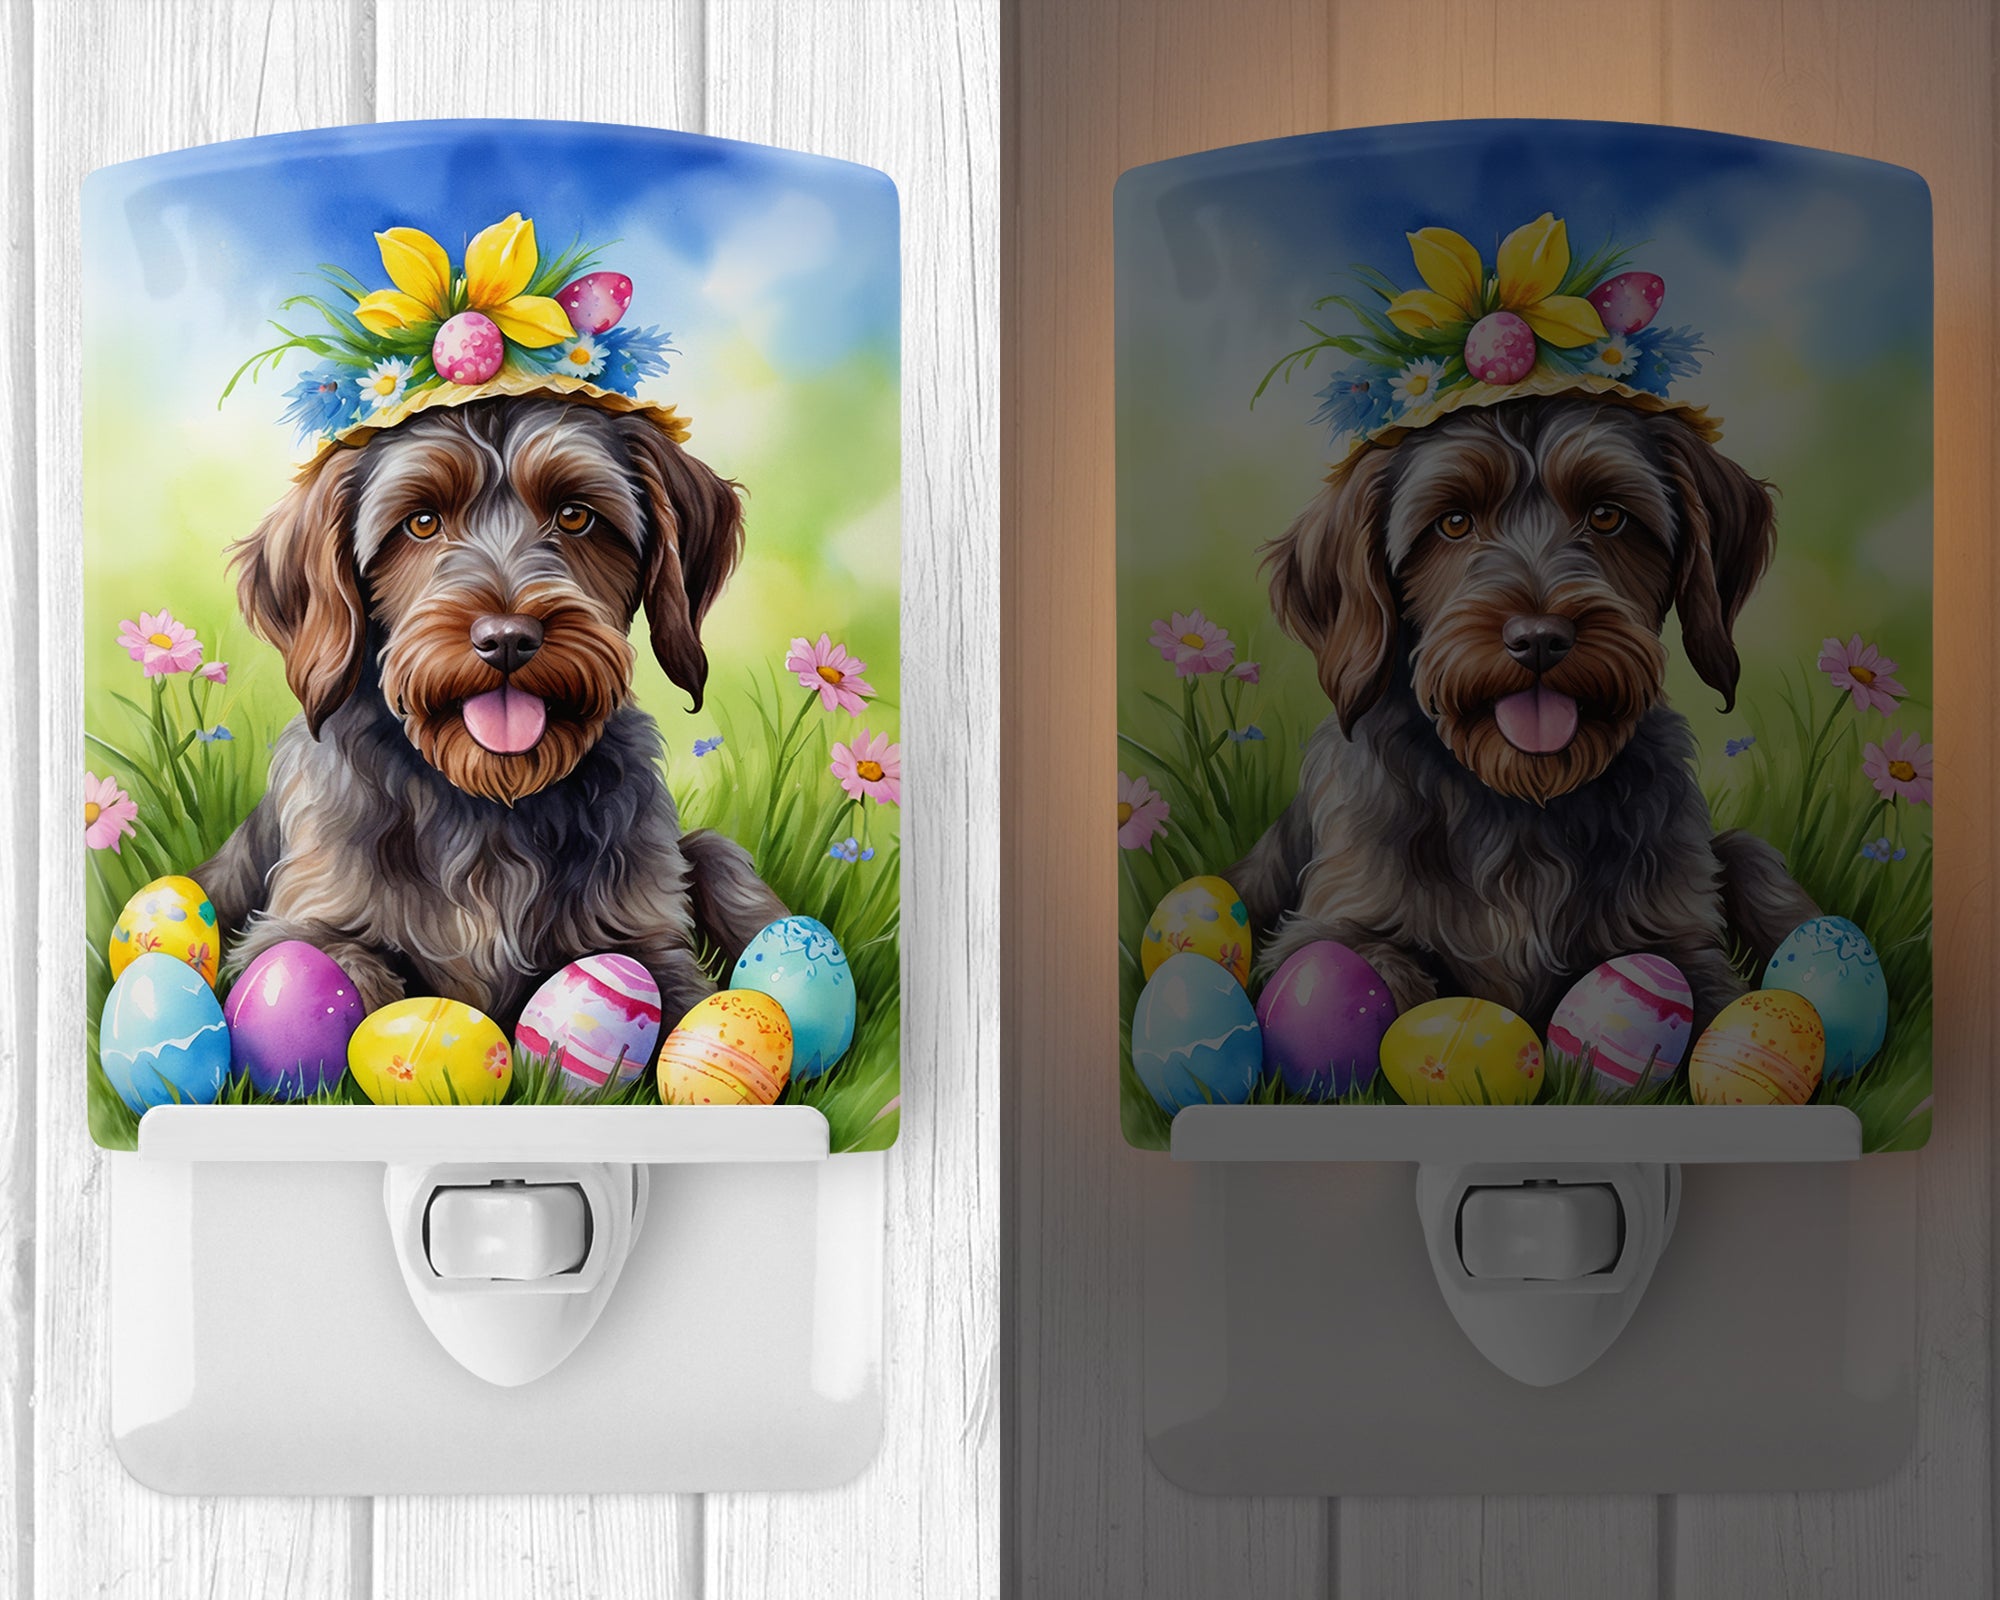 Wirehaired Pointing Griffon Easter Egg Hunt Ceramic Night Light